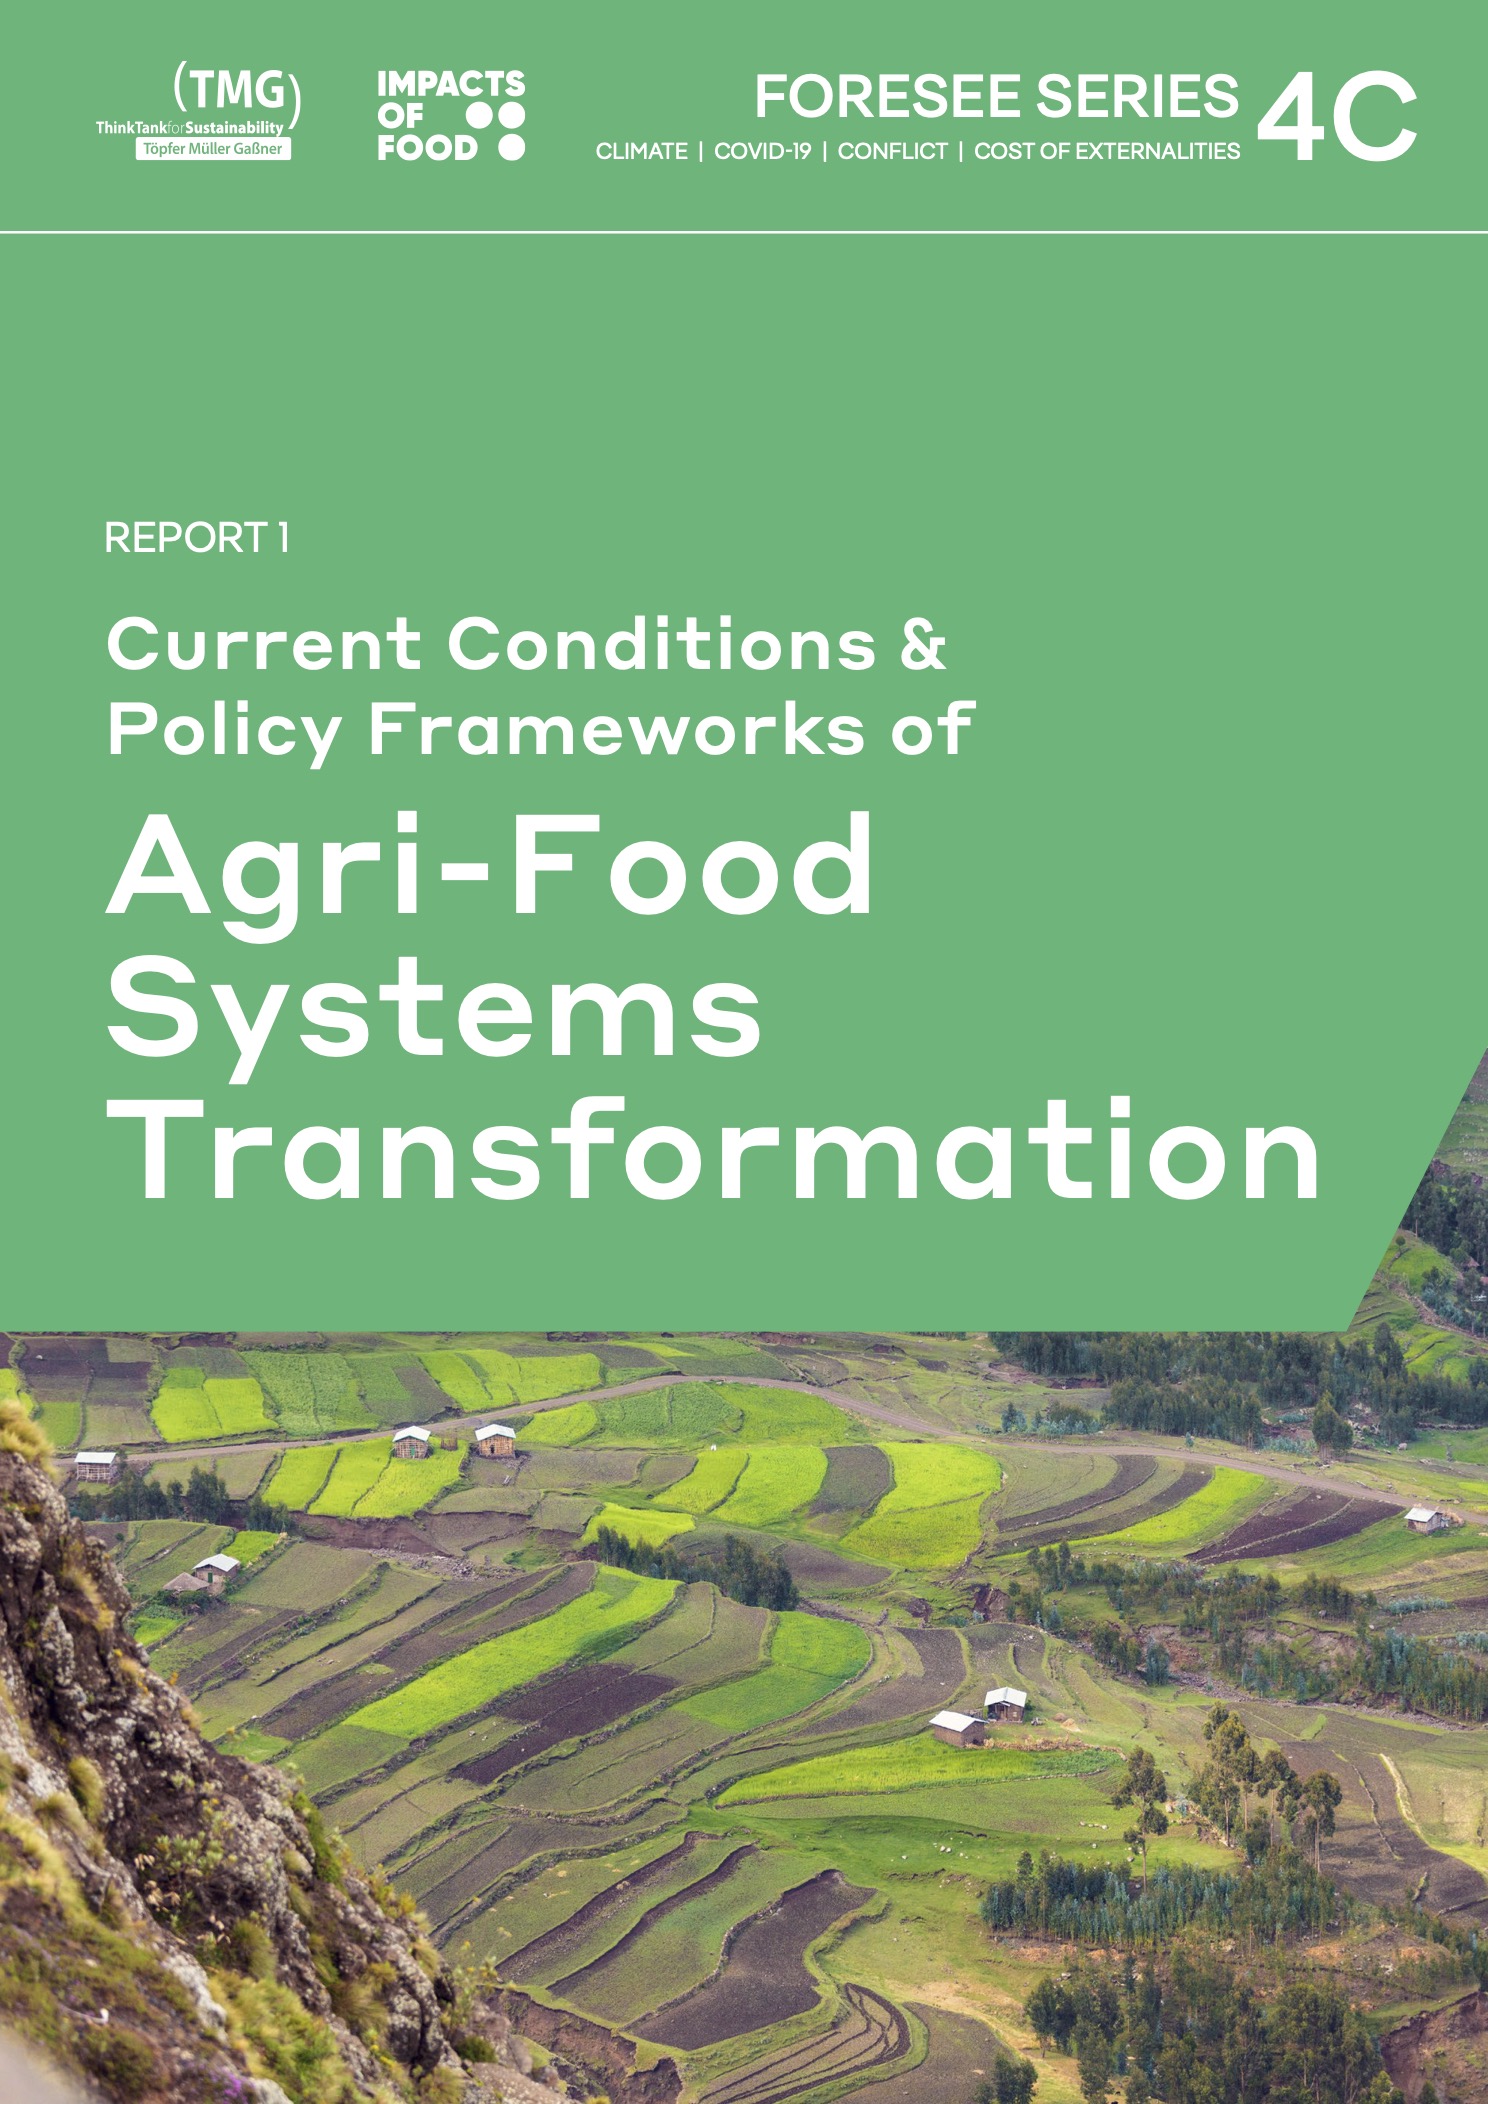 FORESEE (4C) Report 1: Current Conditions and Policy Frameworks of Agri-Food Systems Transformation